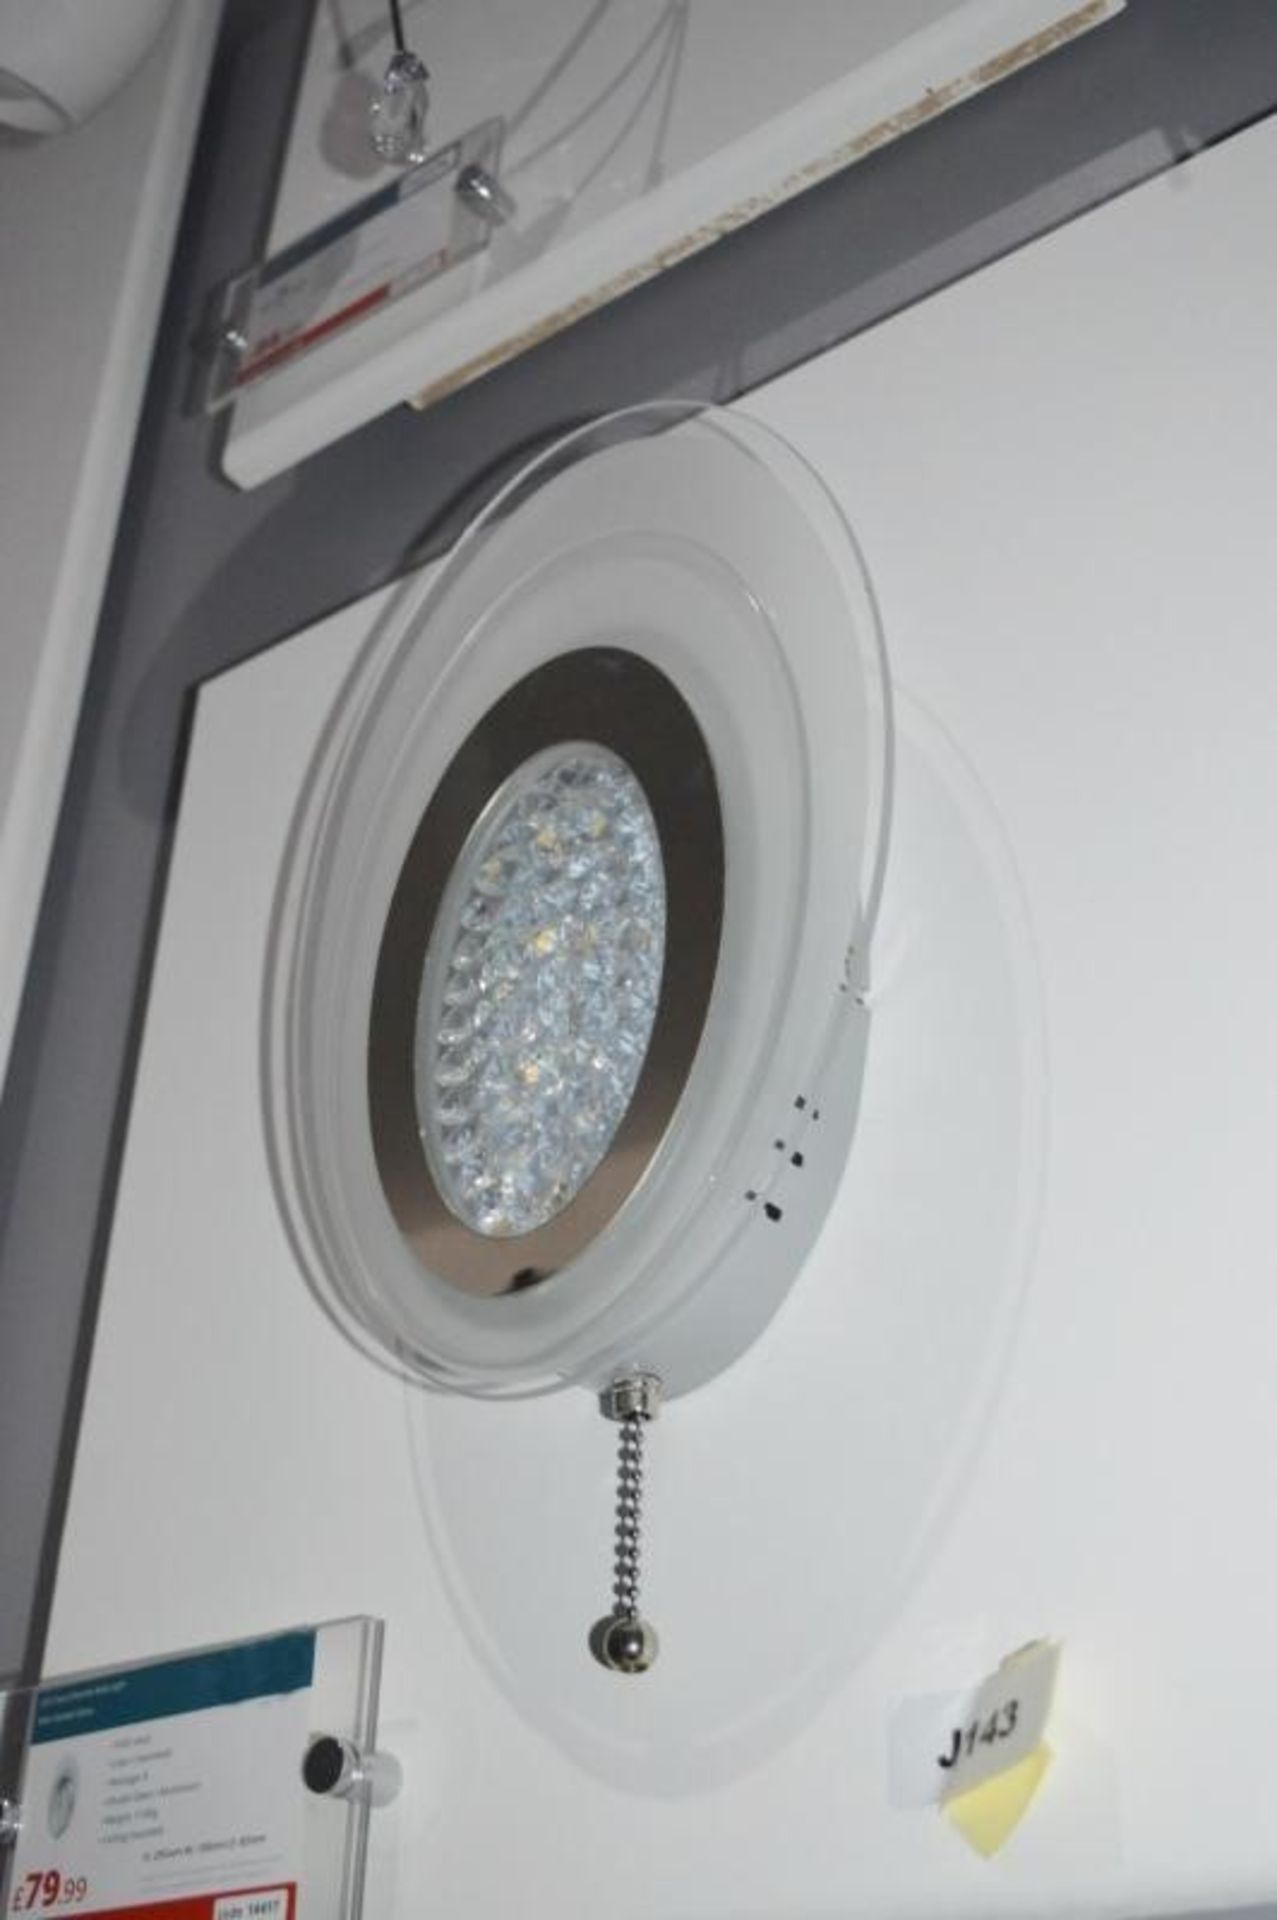 1 x LED Oval Chrome Wall Light With Frosted Glass - Ex Display Stock - CL298 - Ref J143 - Location: - Image 5 of 5